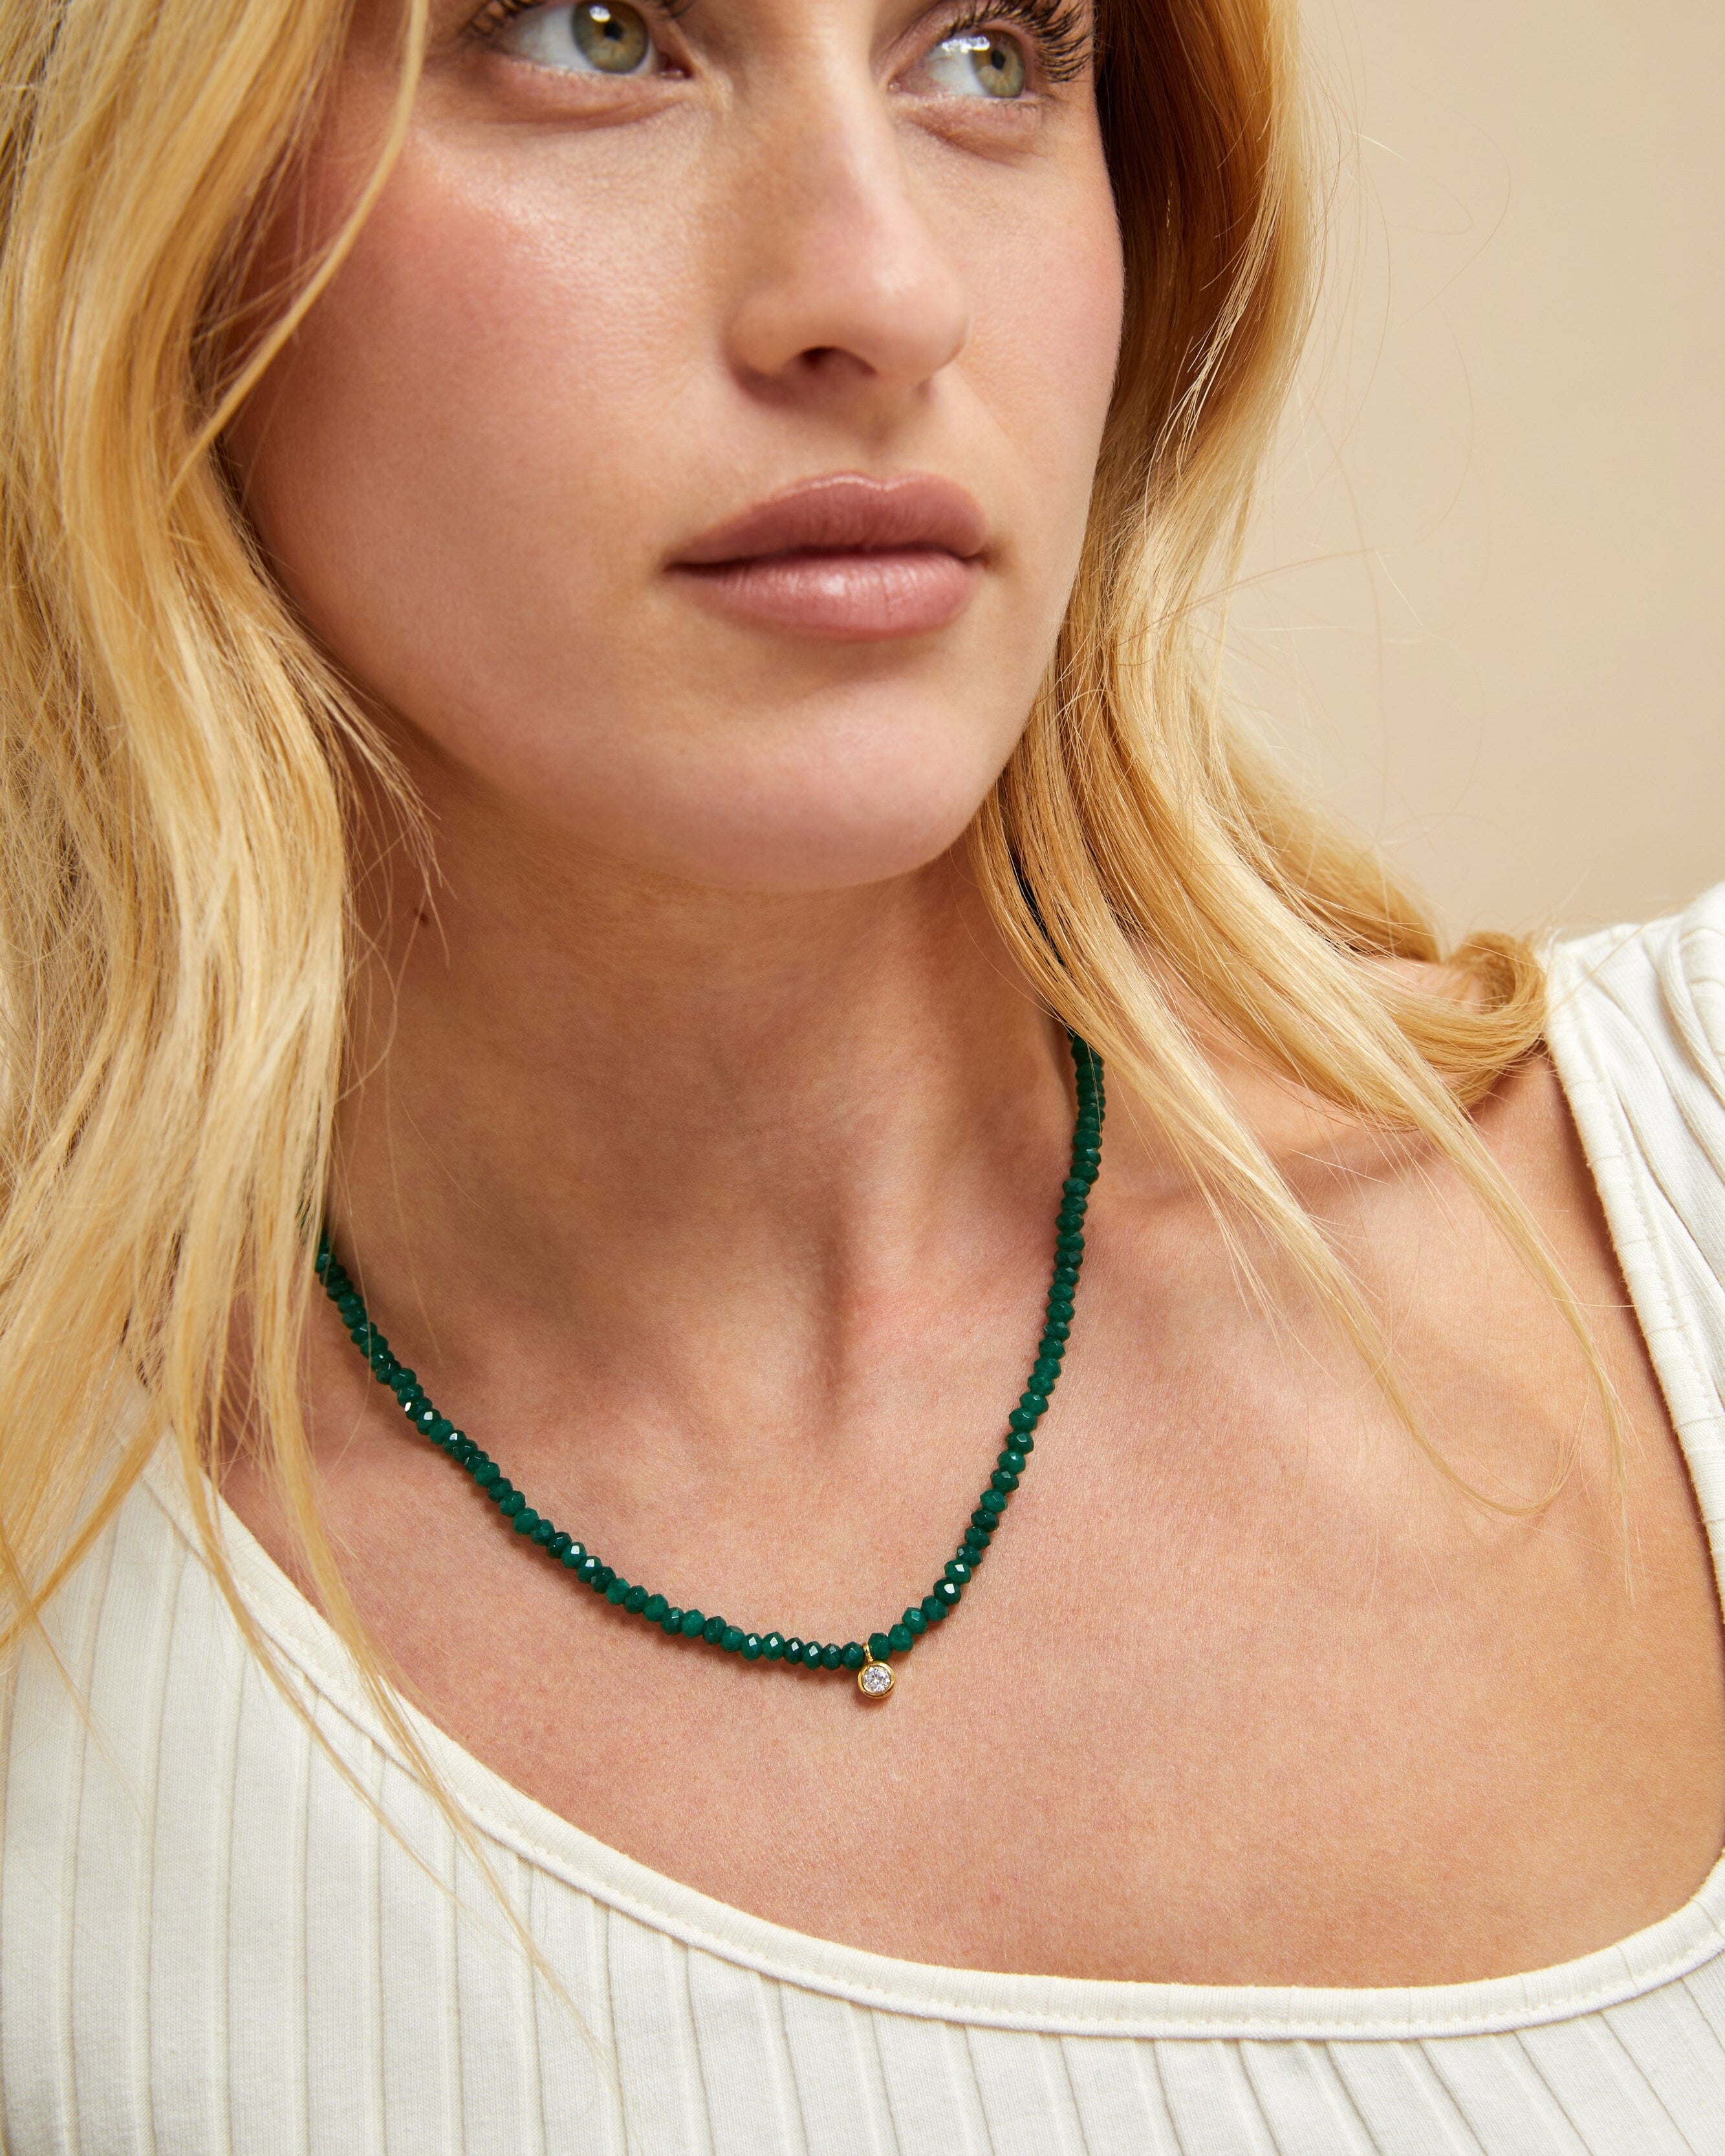 Green Jade and Diamond Necklace - 14K Yellow Gold Necklaces magal-dev 